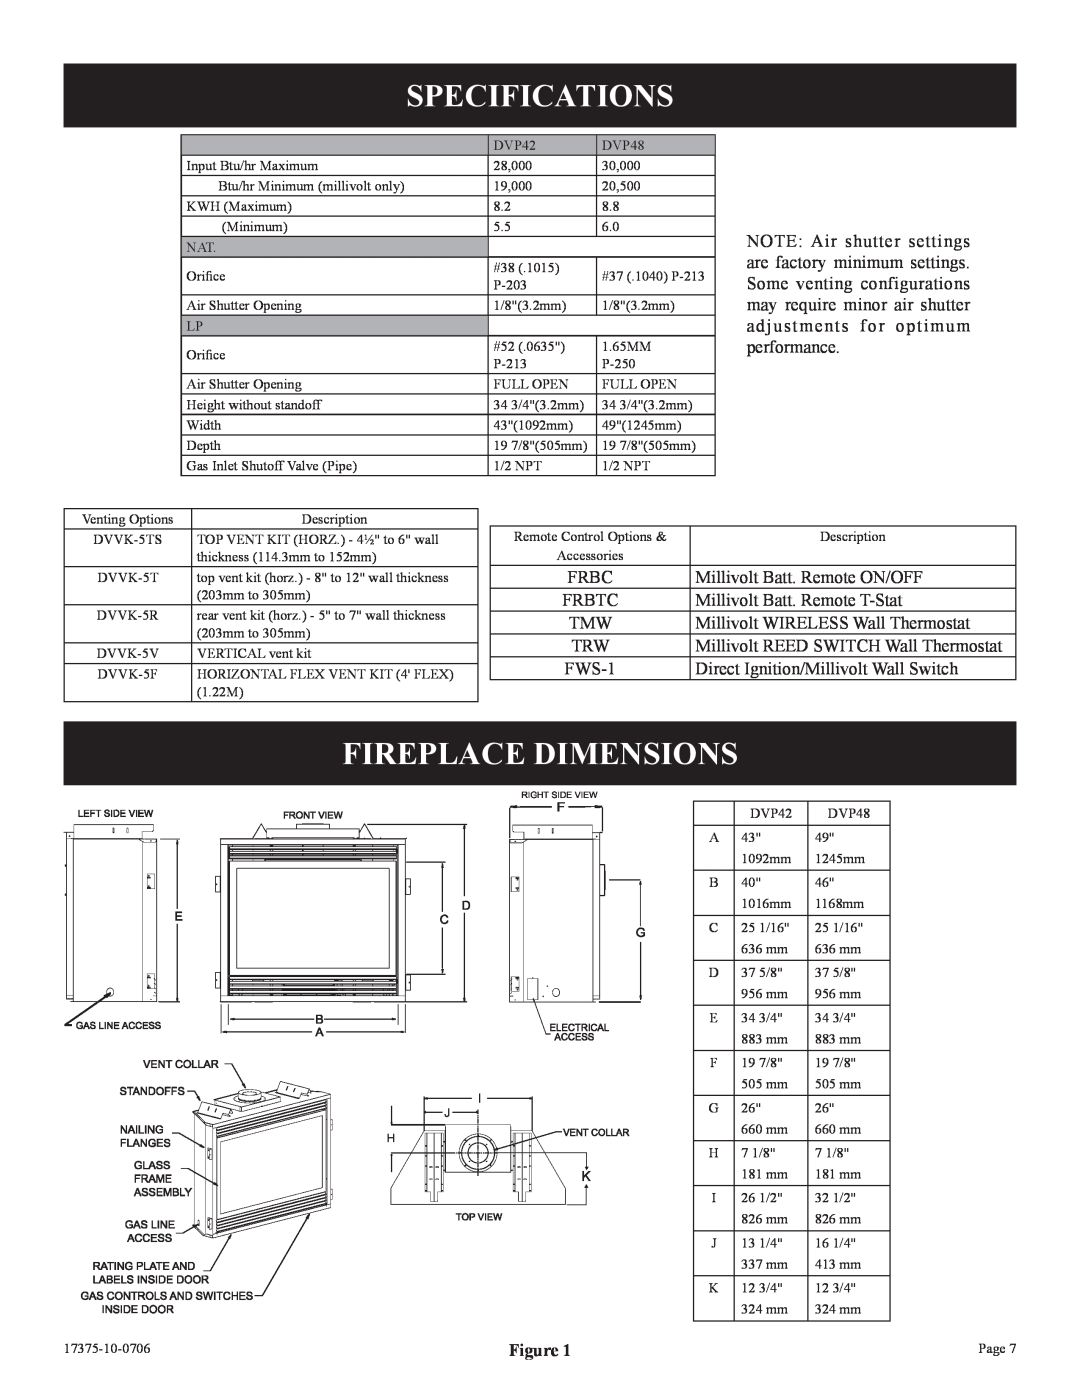 Empire Comfort Systems DVP48FP7(0,1,2,3)(N,P)-1, DVP48FP3(0,1,2,3)(N,P)-1 Specifications, Fireplace Dimensions 